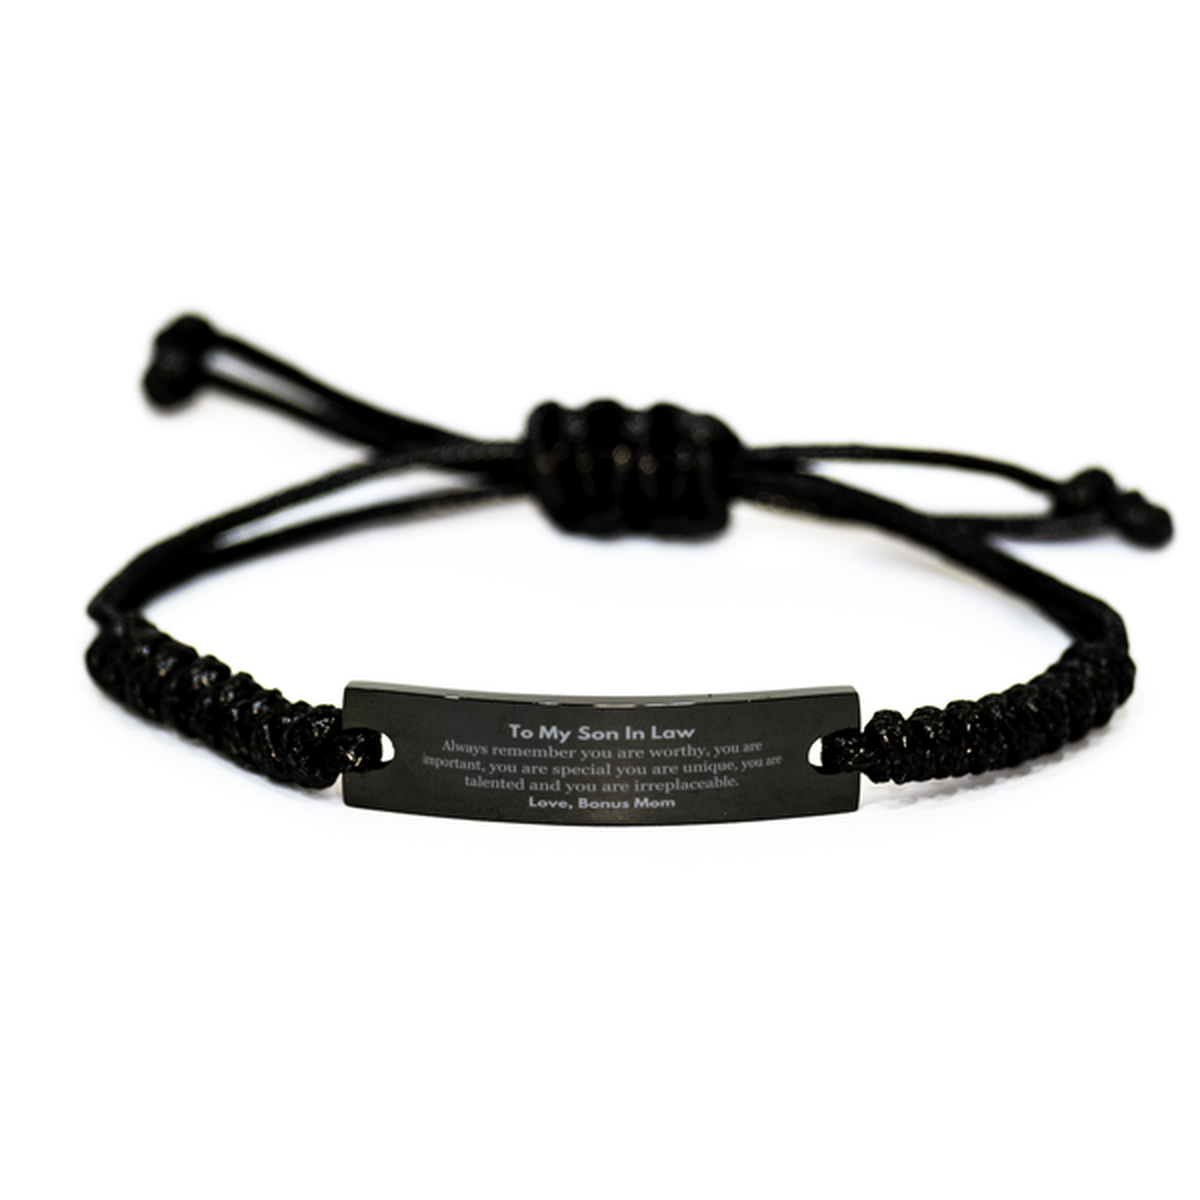 Son In Law Birthday Gifts from Bonus Mom, Inspirational Black Rope Bracelet for Son In Law Christmas Graduation Gifts for Son In Law Always remember you are worthy, you are important. Love, Bonus Mom